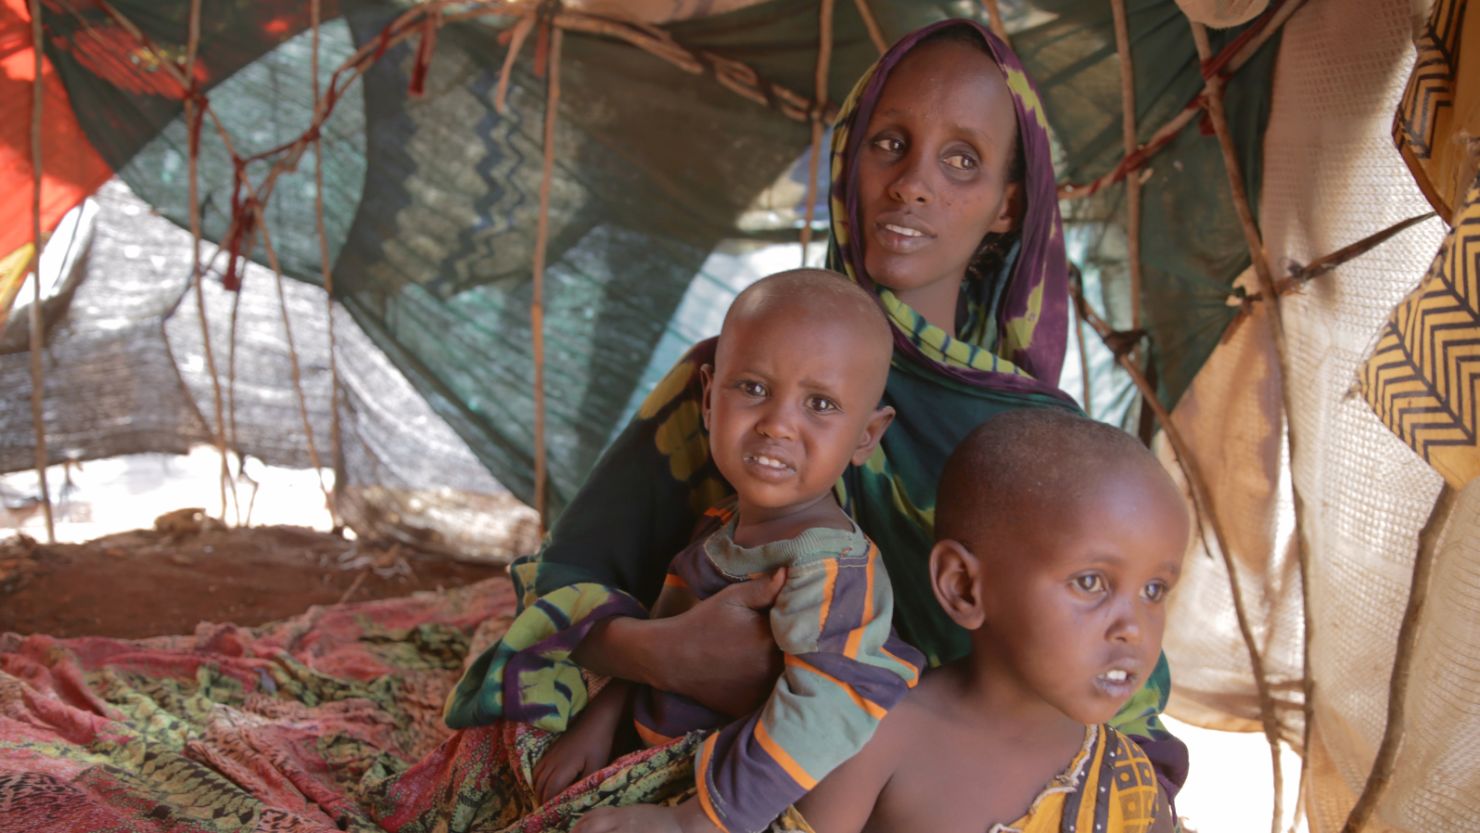 Fatuma Hassan Hussein sits with her two children Shankaron, 3, and Rahma, 15 months, in a makeshift shelter in Baidoa, Somalia. Fatuma says she was having trouble feeding her family. She says she traveled more than a hundred miles to get to the camp.